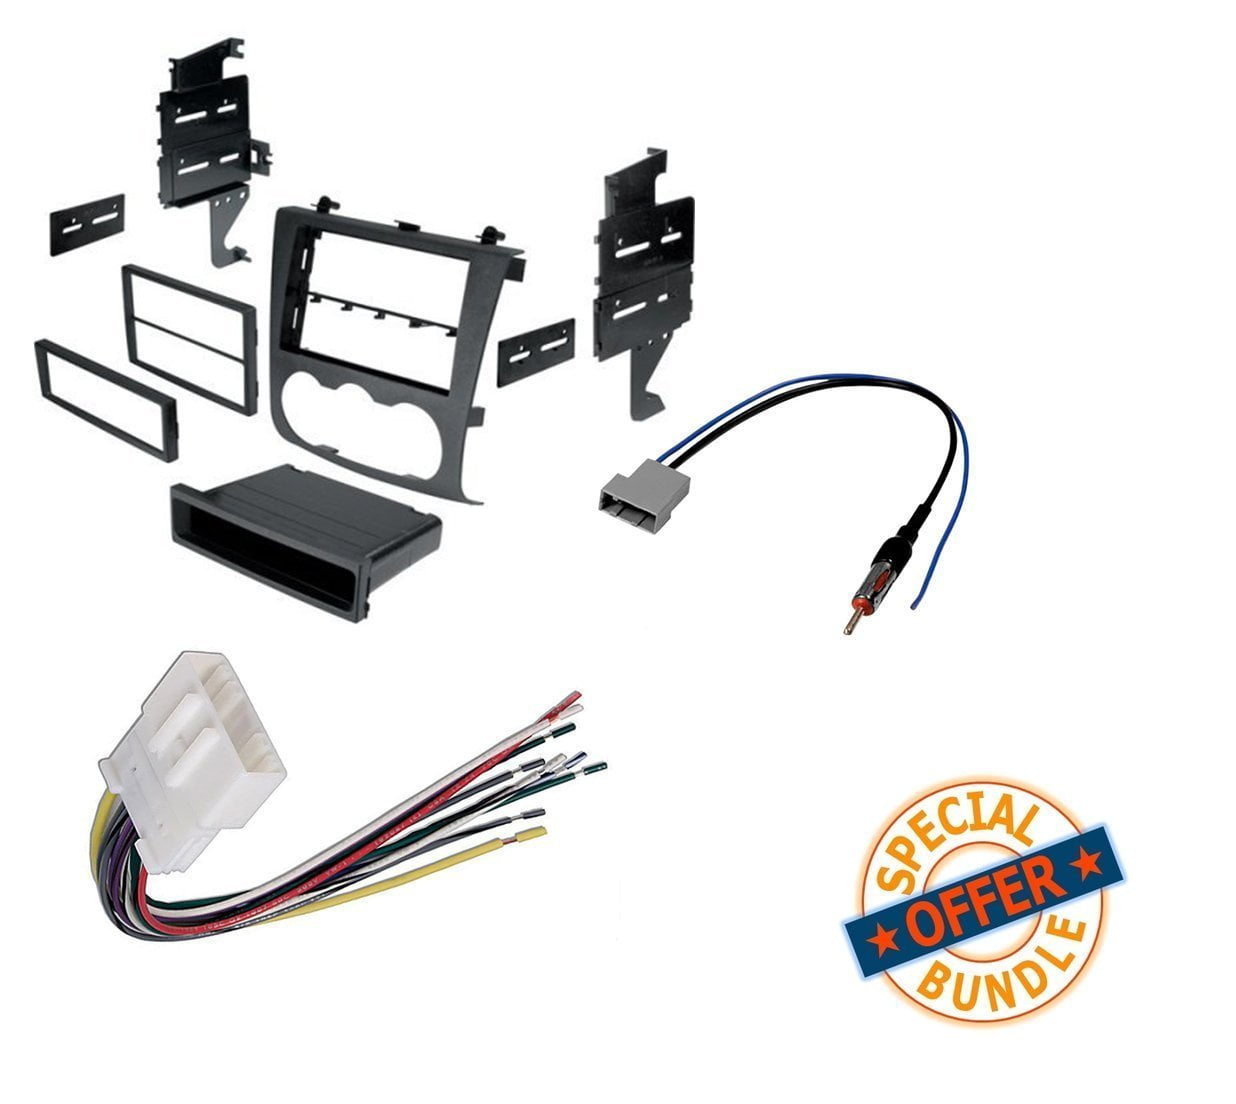 Stereo Single Double DIN Install Dash Kit w/Harness for 2007-2011 Nissan Altima 